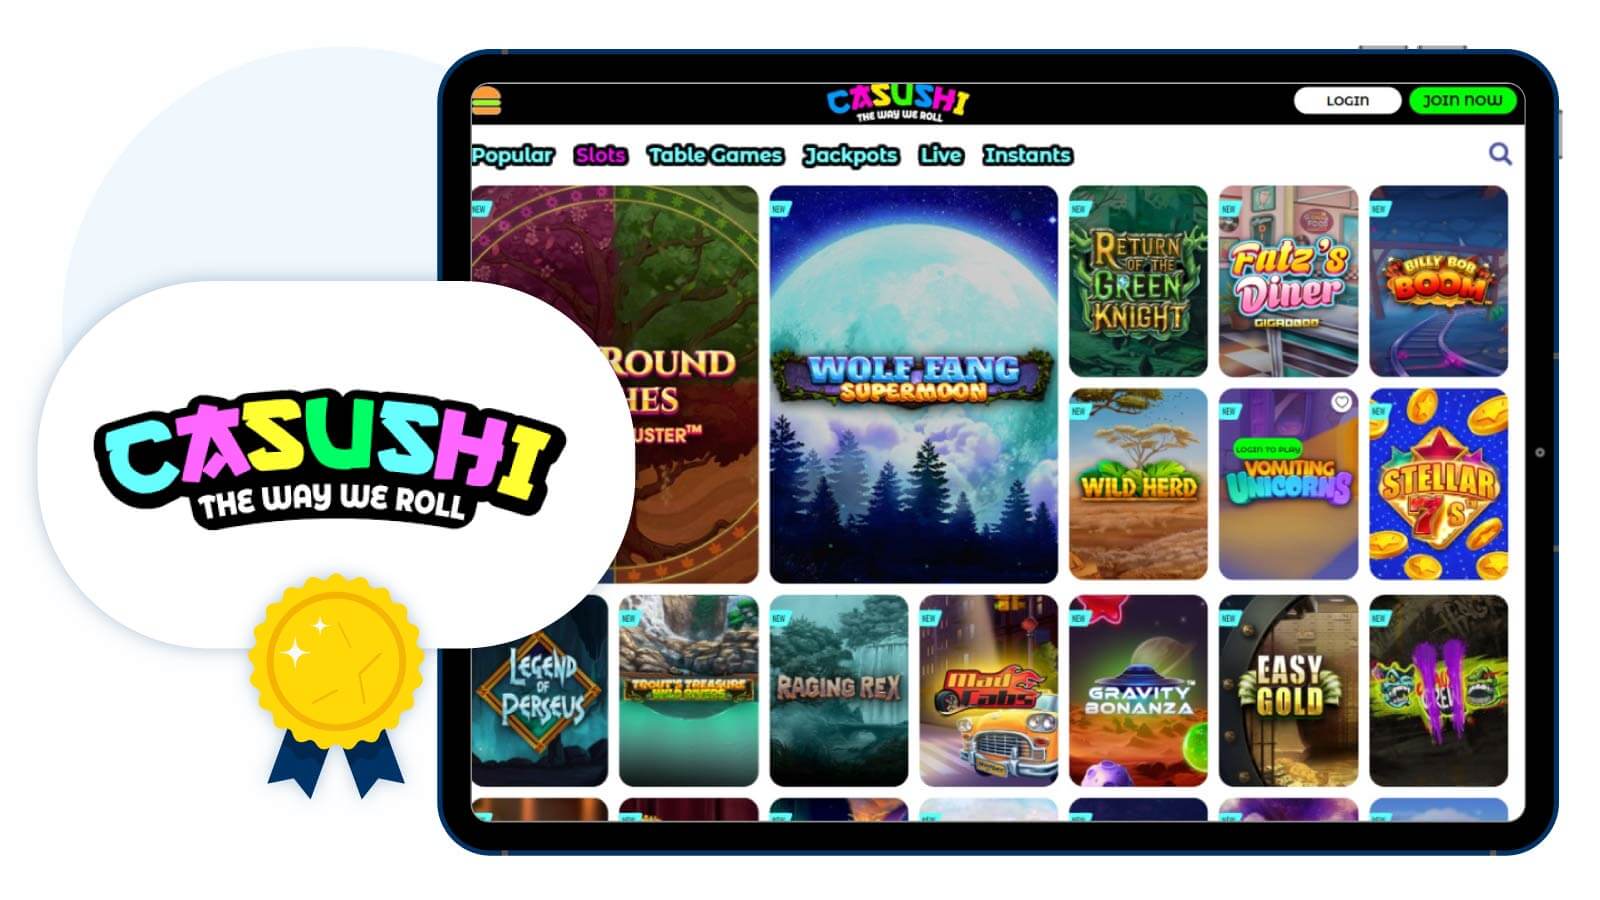 Casushi-Casino-Our-#1-Choice-for-the-Best-UK-PayPal-Casino-Site